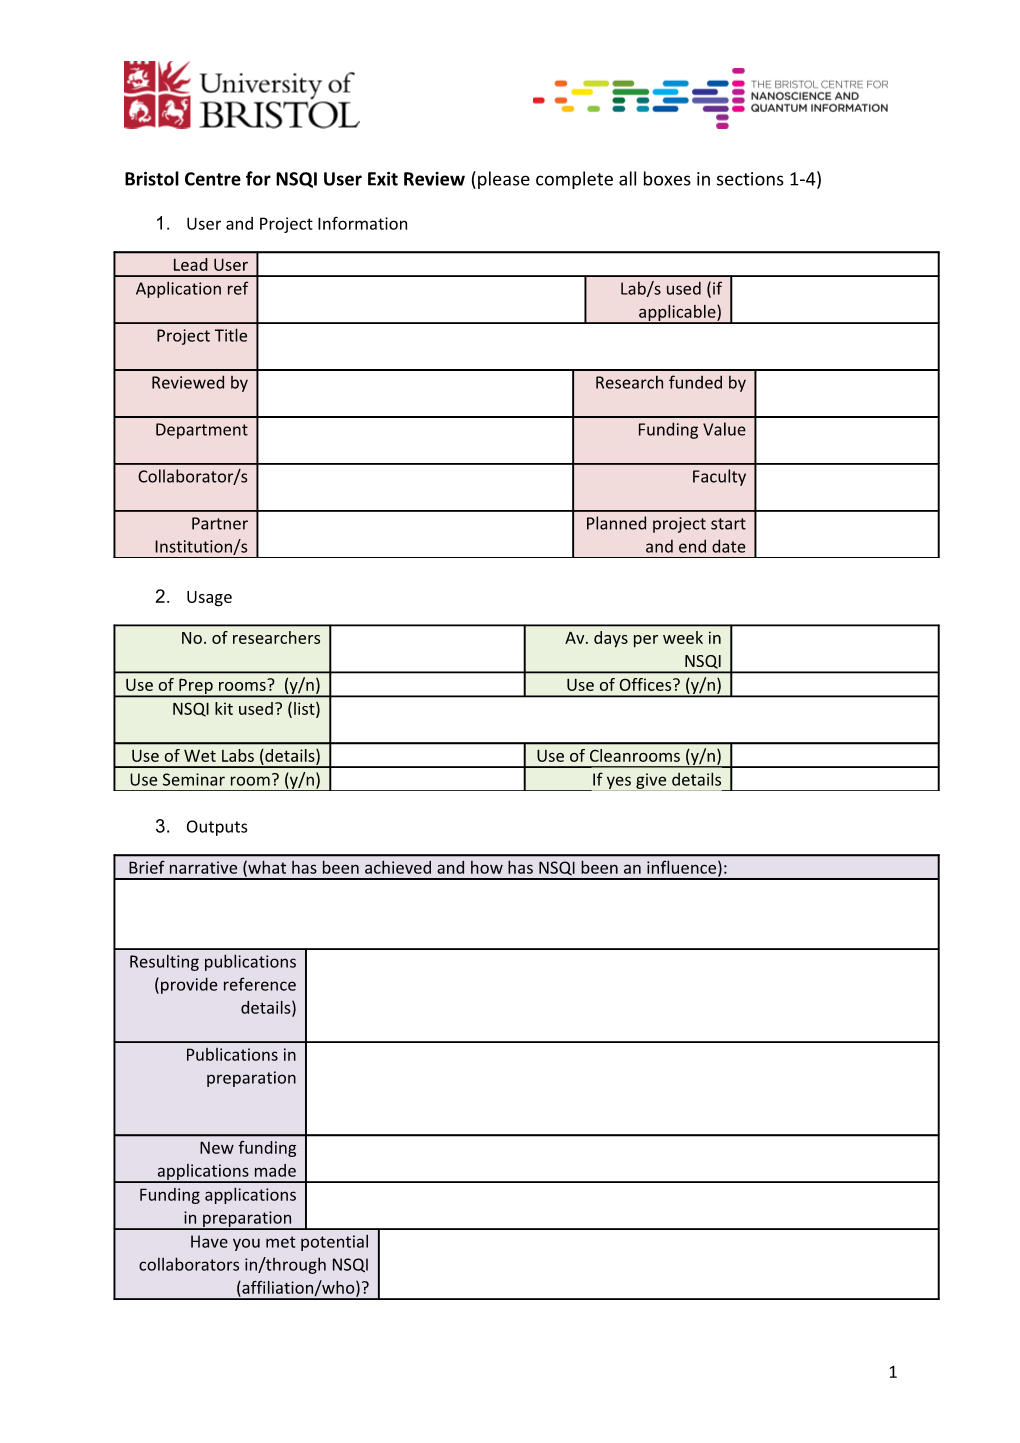 Bristol Centre for NSQI User Exit Review (Please Complete All Boxes in Sections 1-4)